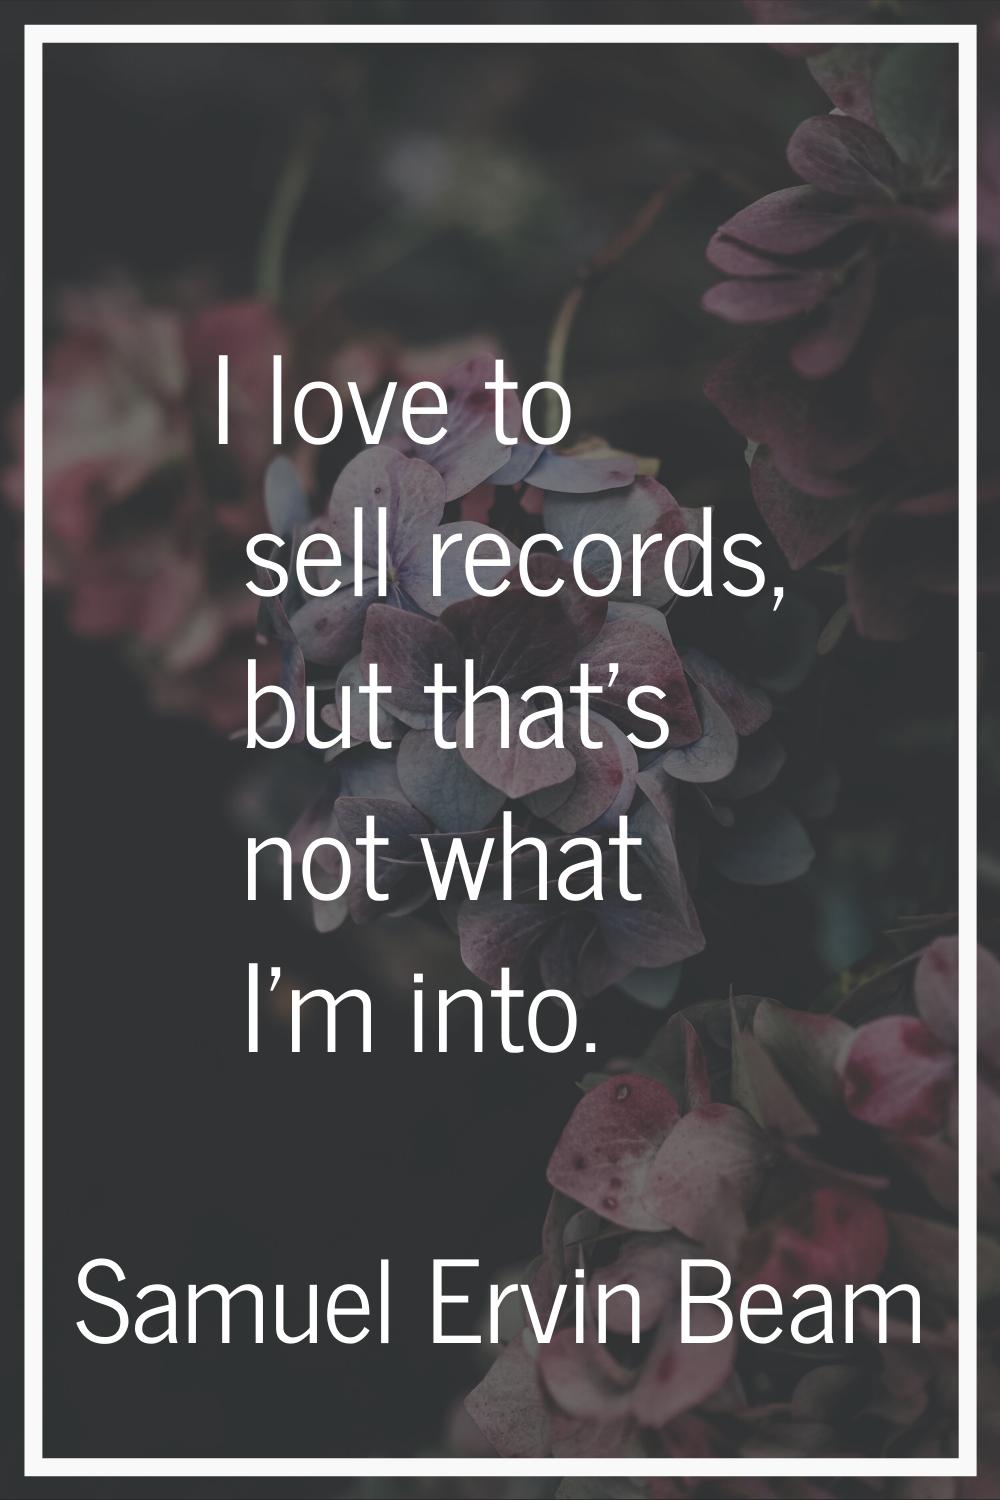 I love to sell records, but that's not what I'm into.